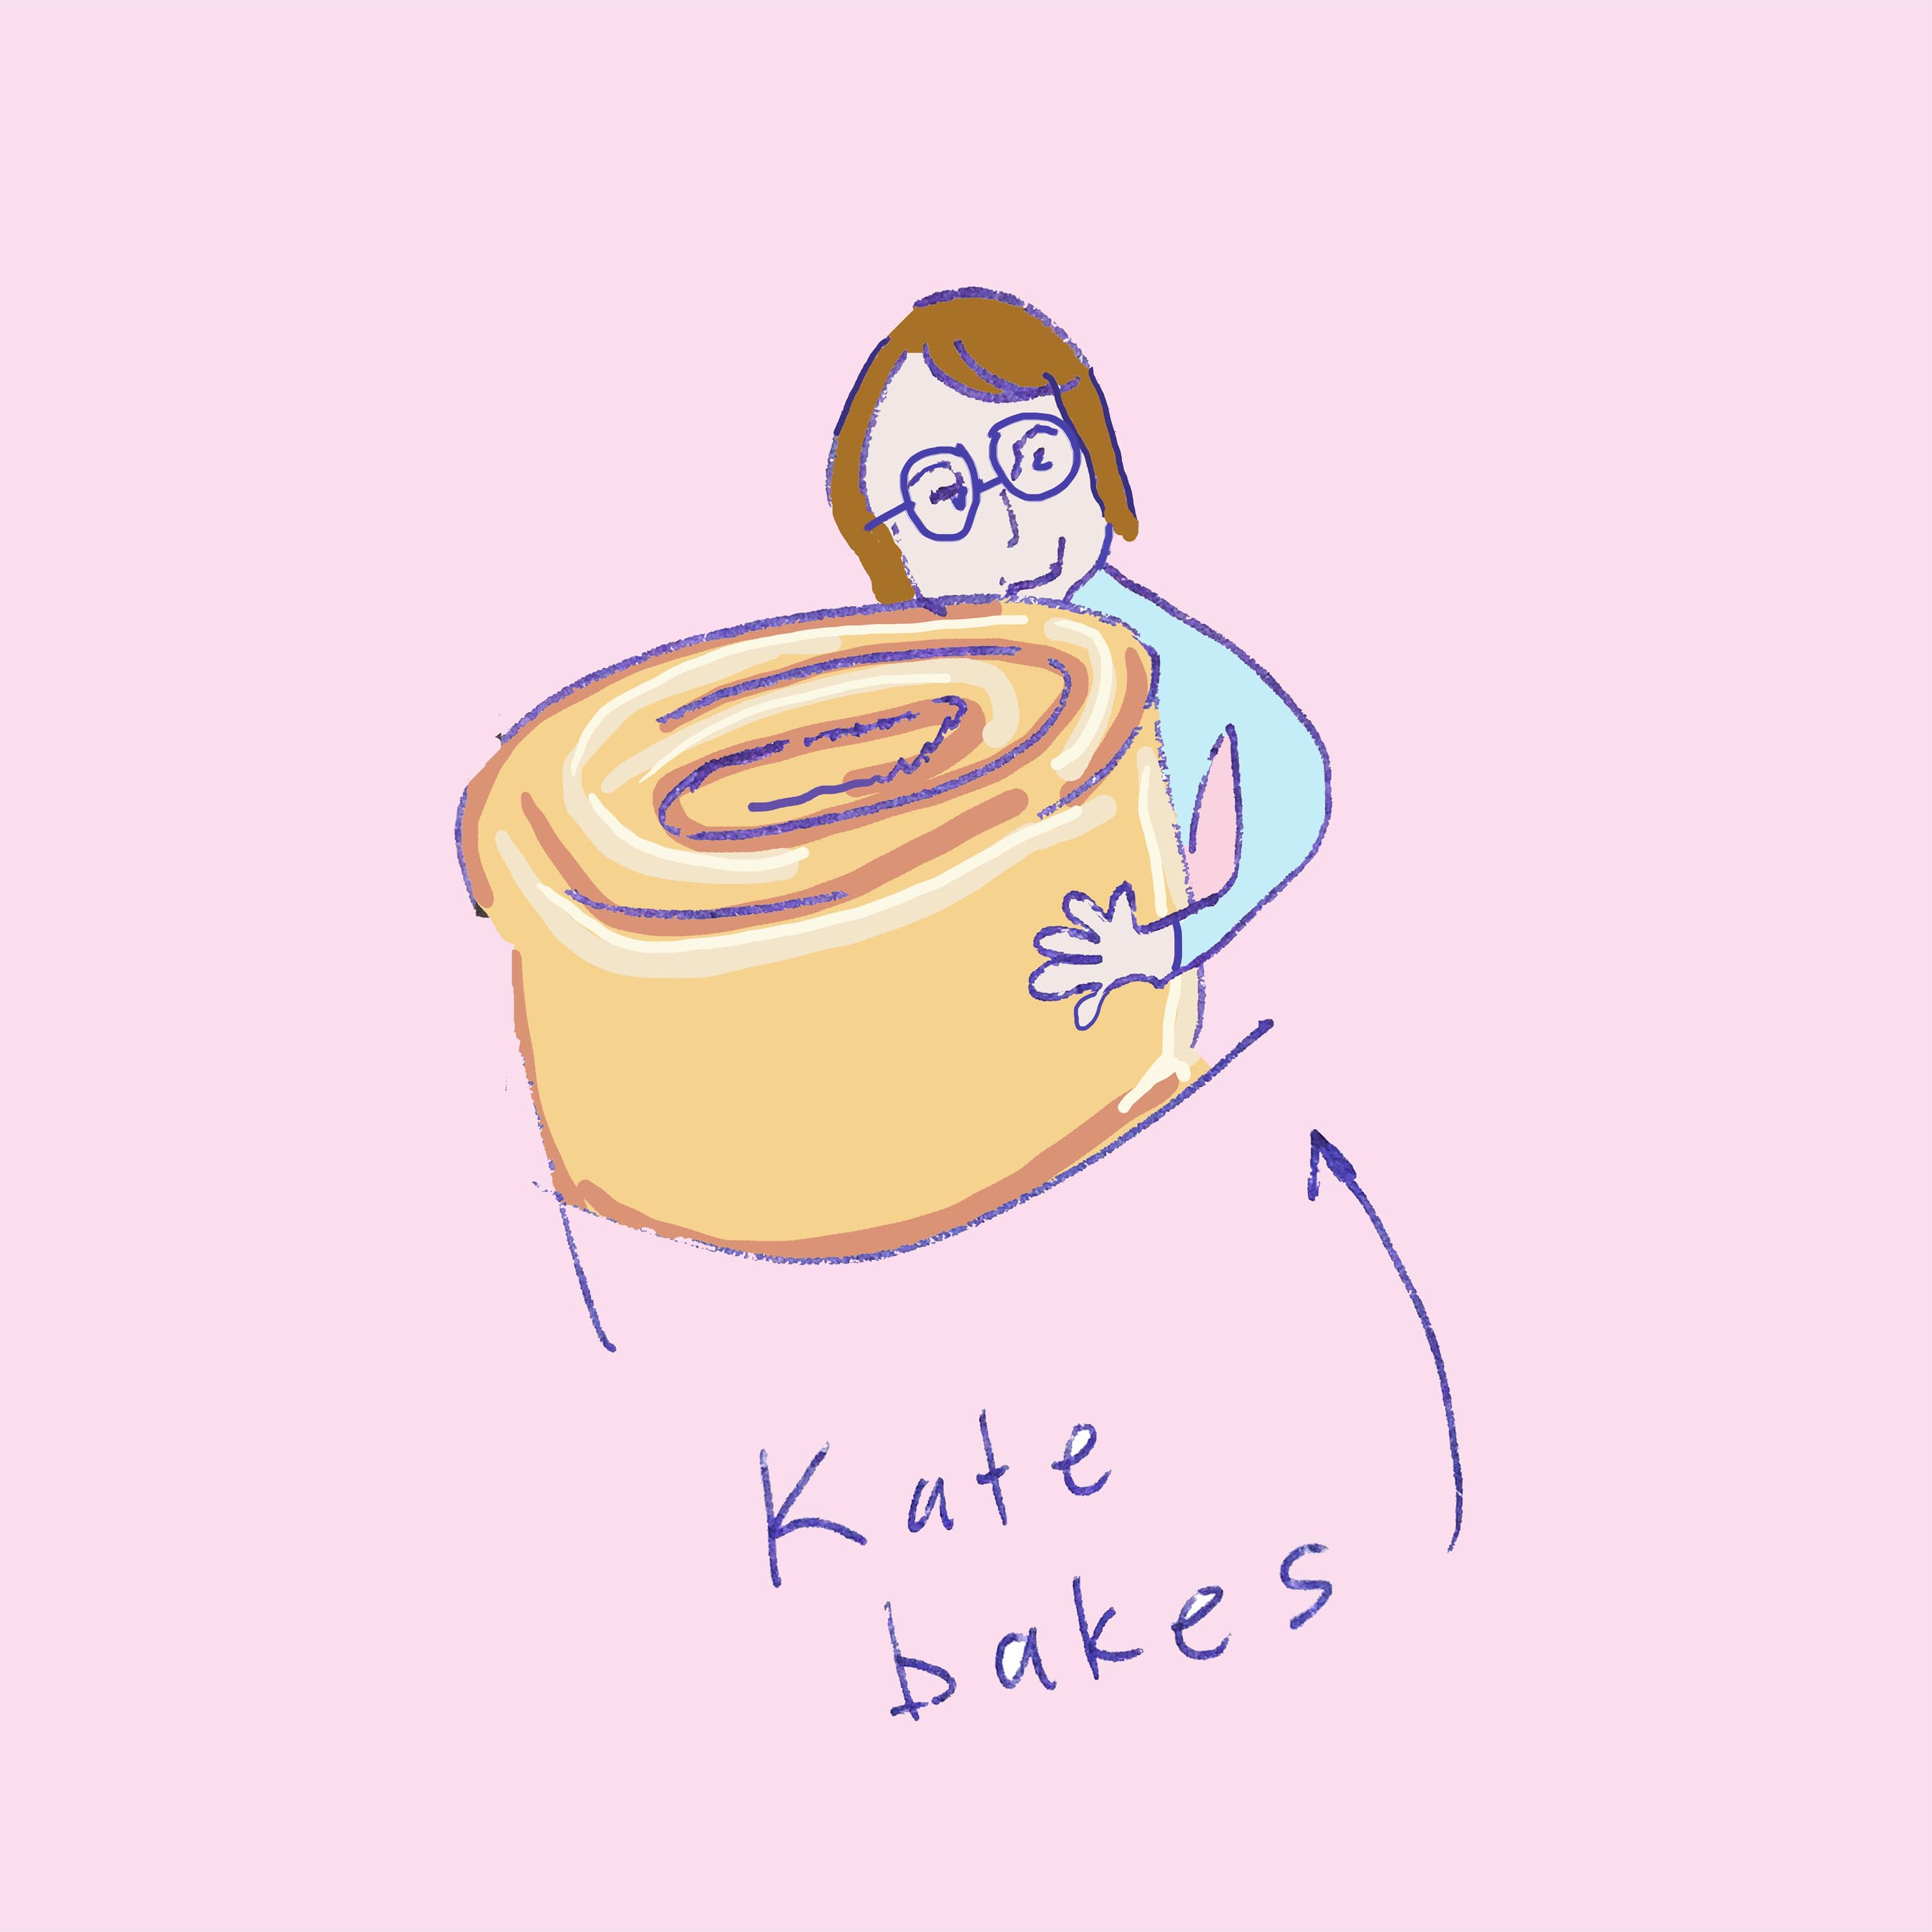 art every day number 525 kate bakes illustration sketch